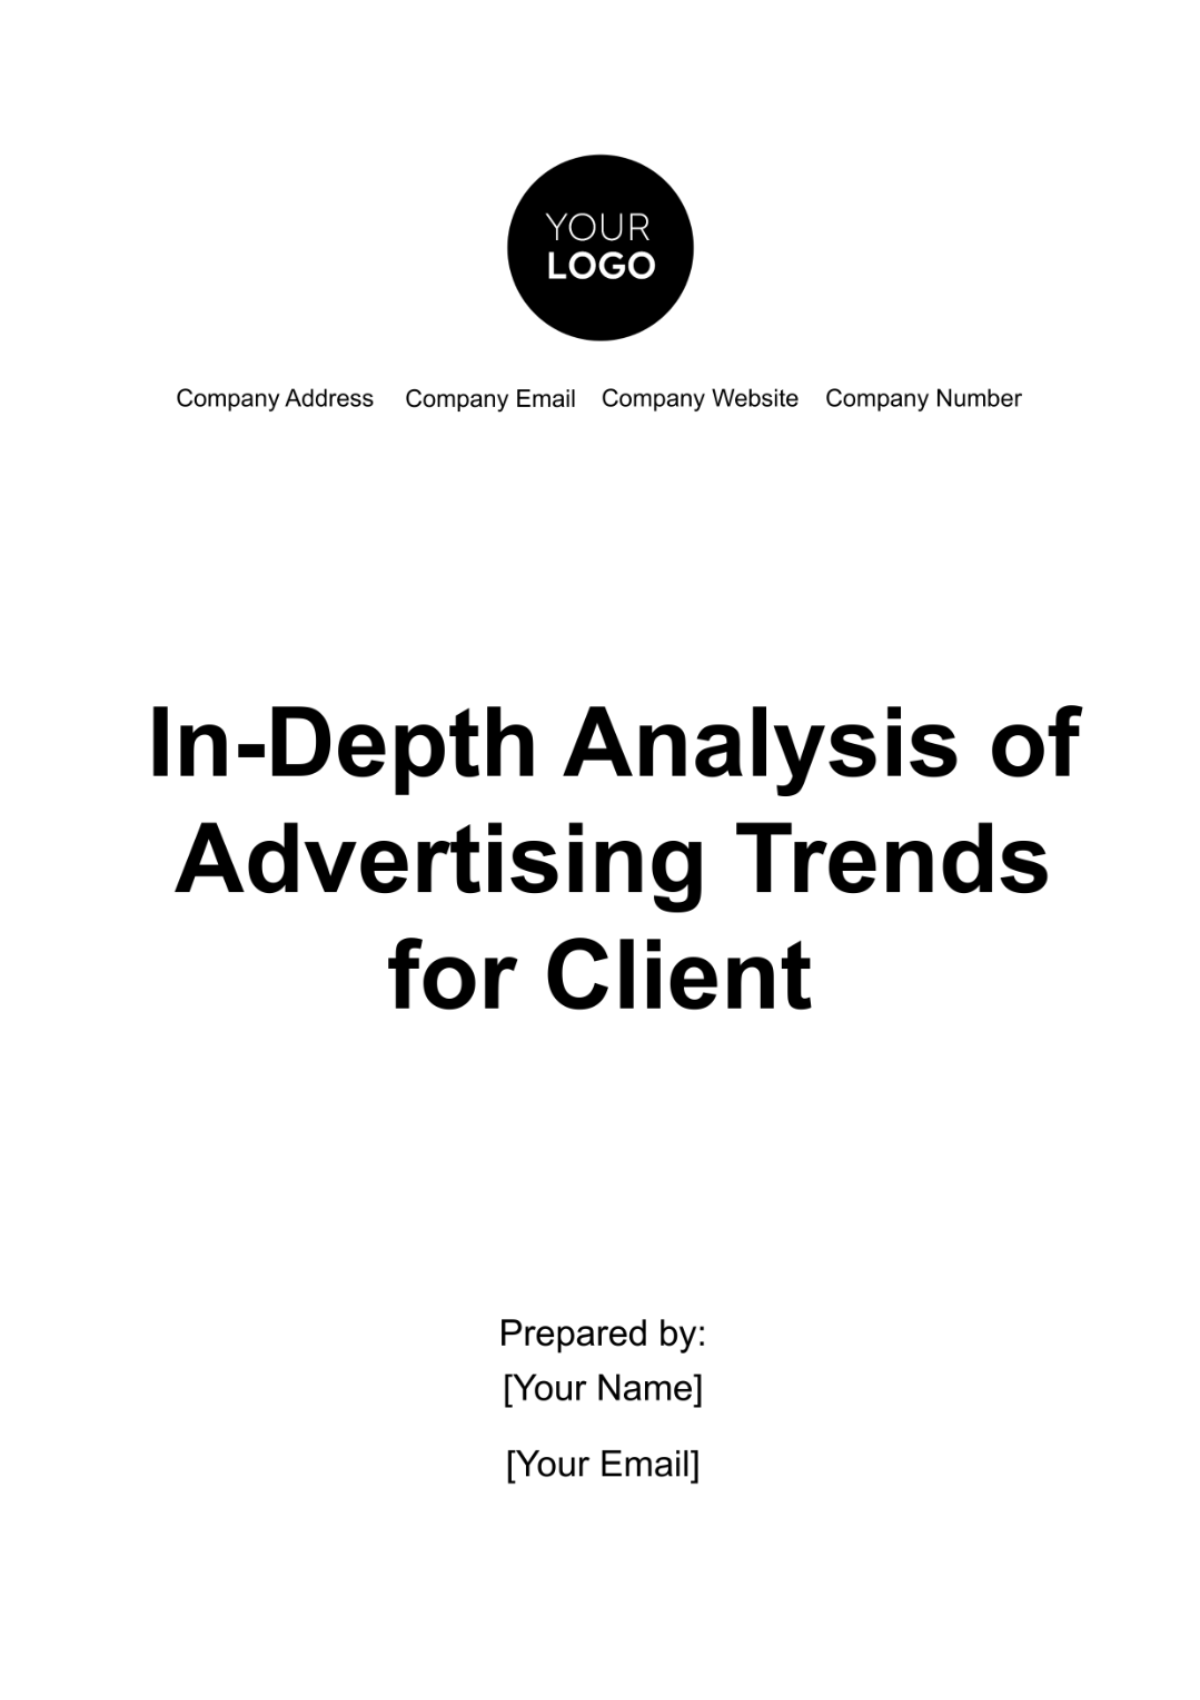 Free In-Depth Analysis of Advertising Trends for Client Template